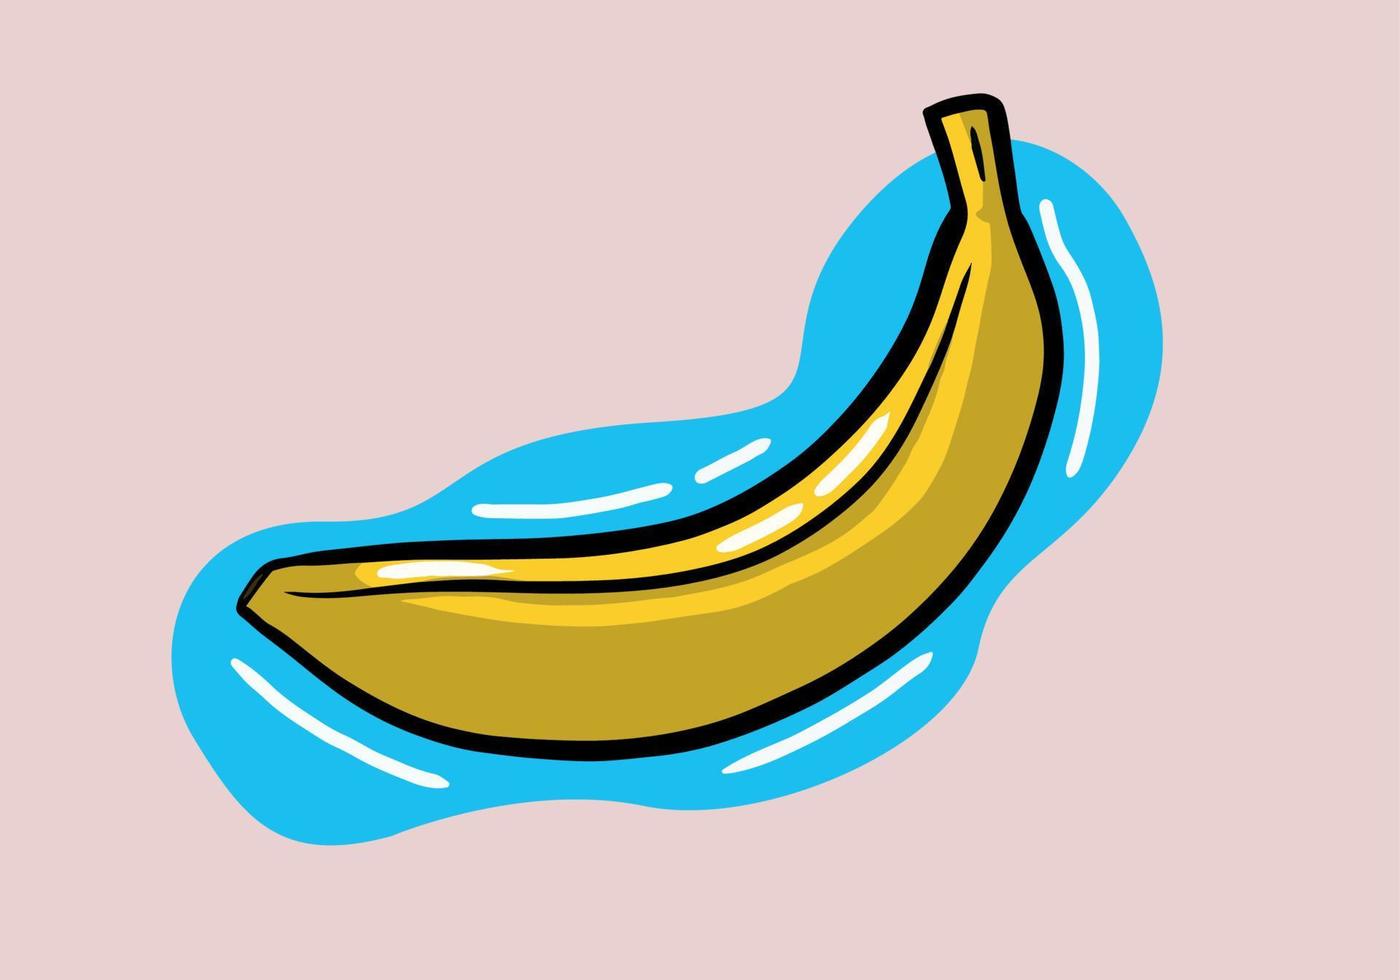 Vector slice of banana isolated on isolated background with shadow. Tropical fruits, banana snack or vegetarian nutrition. Vegan food vector icons in a trendy cartoon style. Healthy food concept.